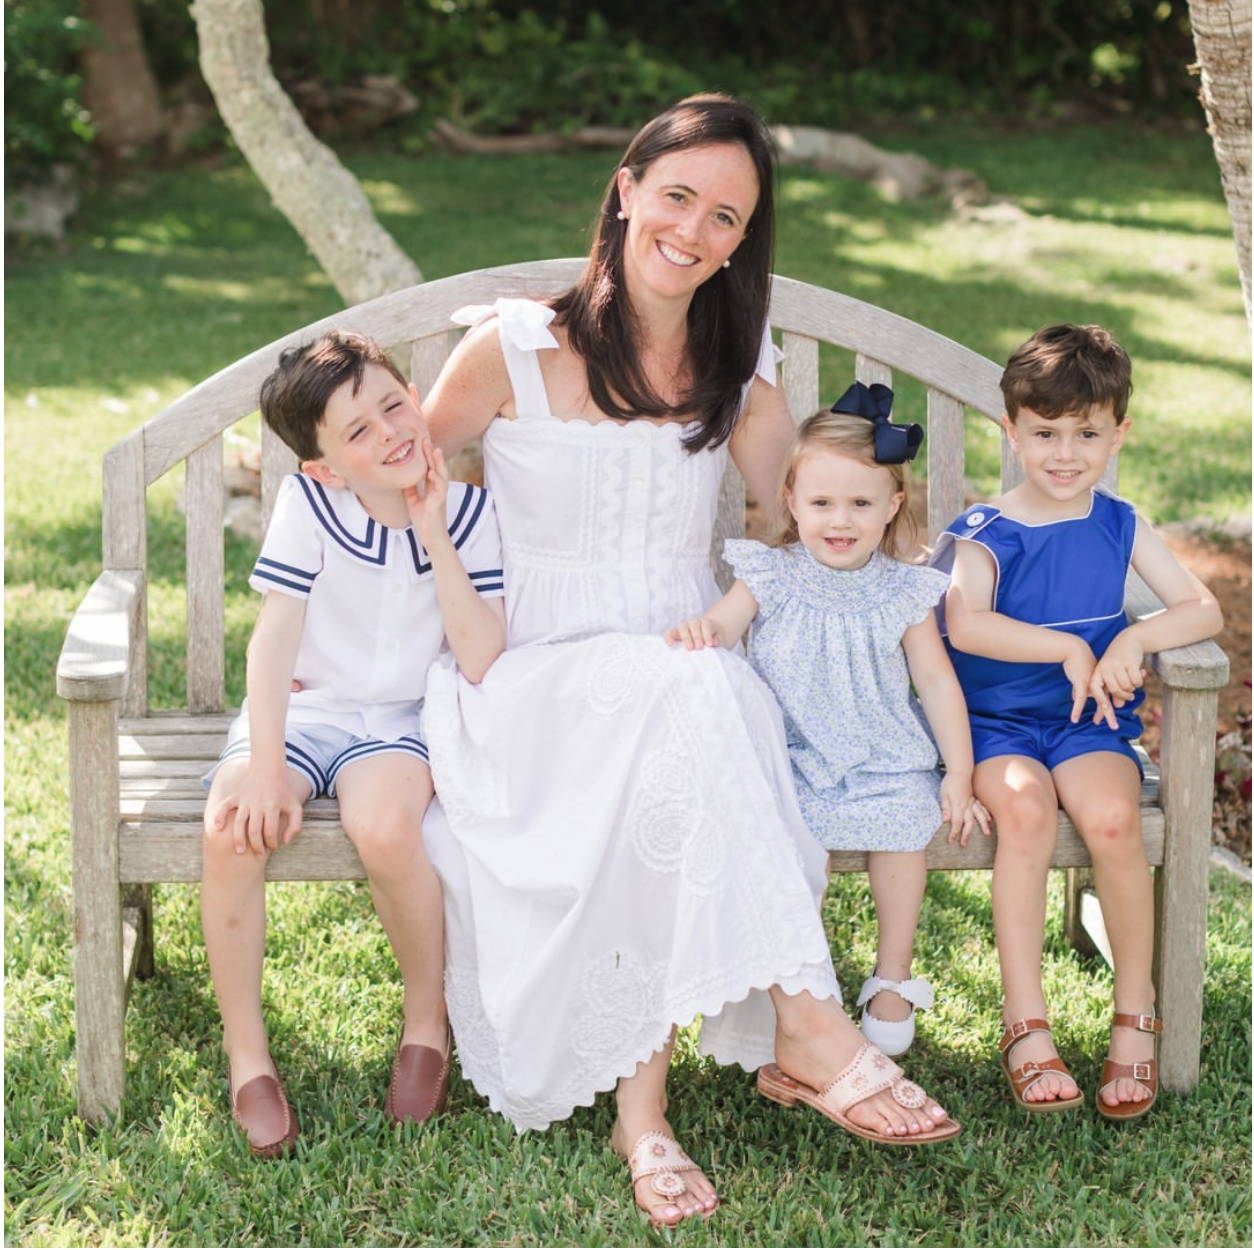 Picture of Meghan and her 3 young children.